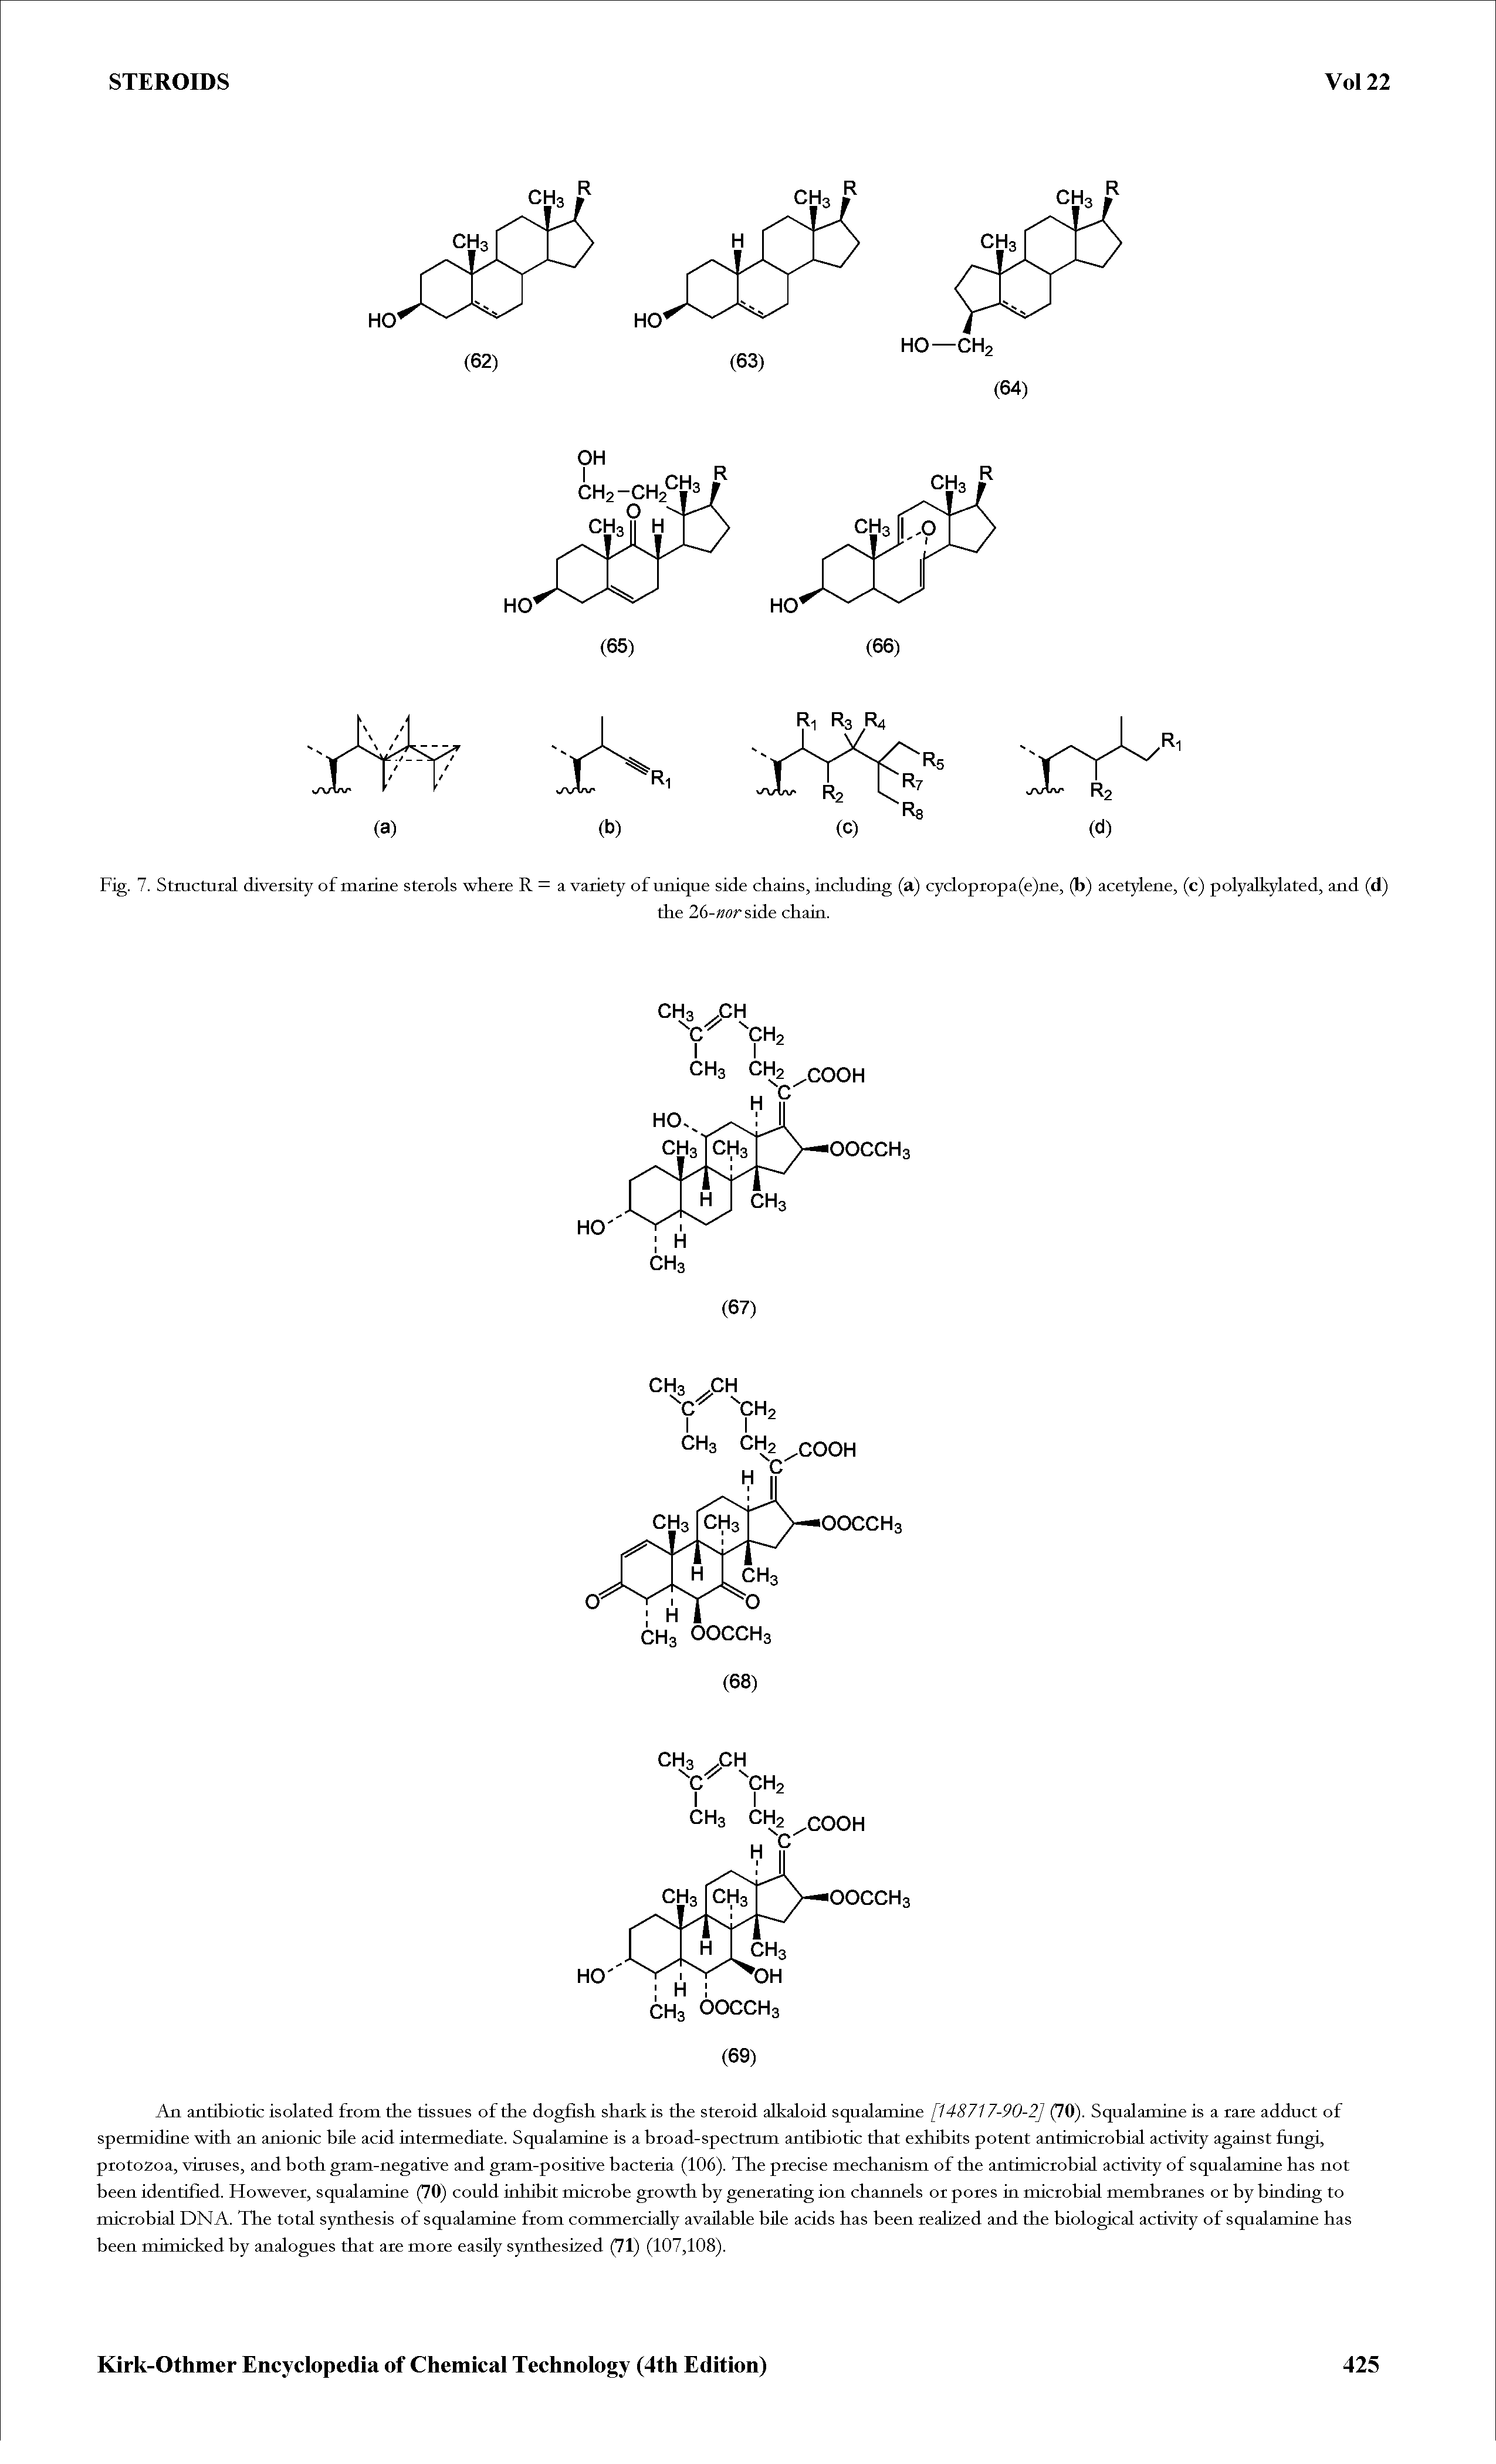 Fig. 7. Structural diversity of marine sterols where R — a variety of unique side chains, including (a) cyclopropa(e)ne, (b) acetylene, (c) polyalhylated, and (d)...